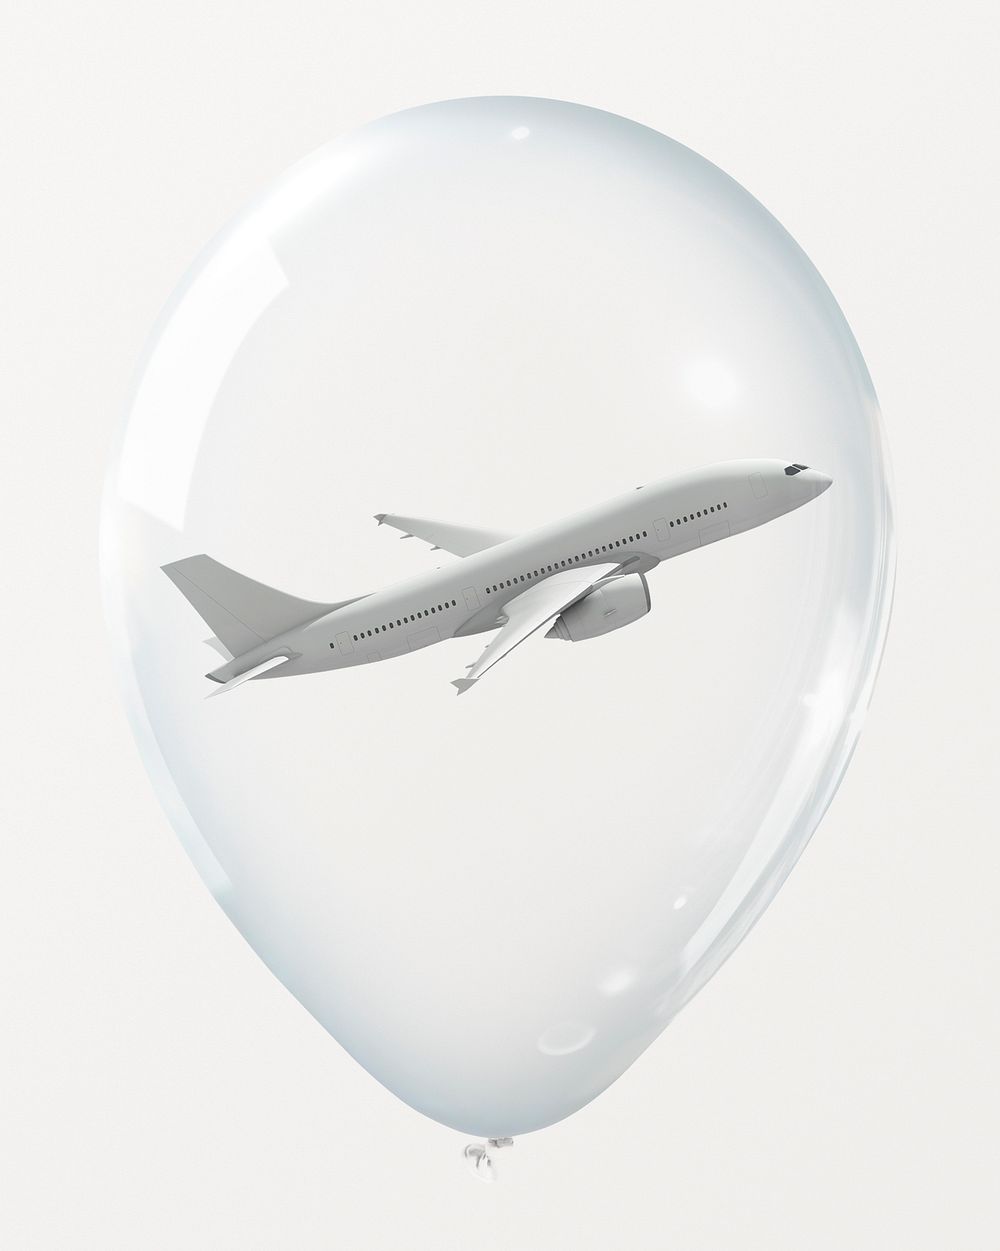 Plane in clear balloon, travel insurance